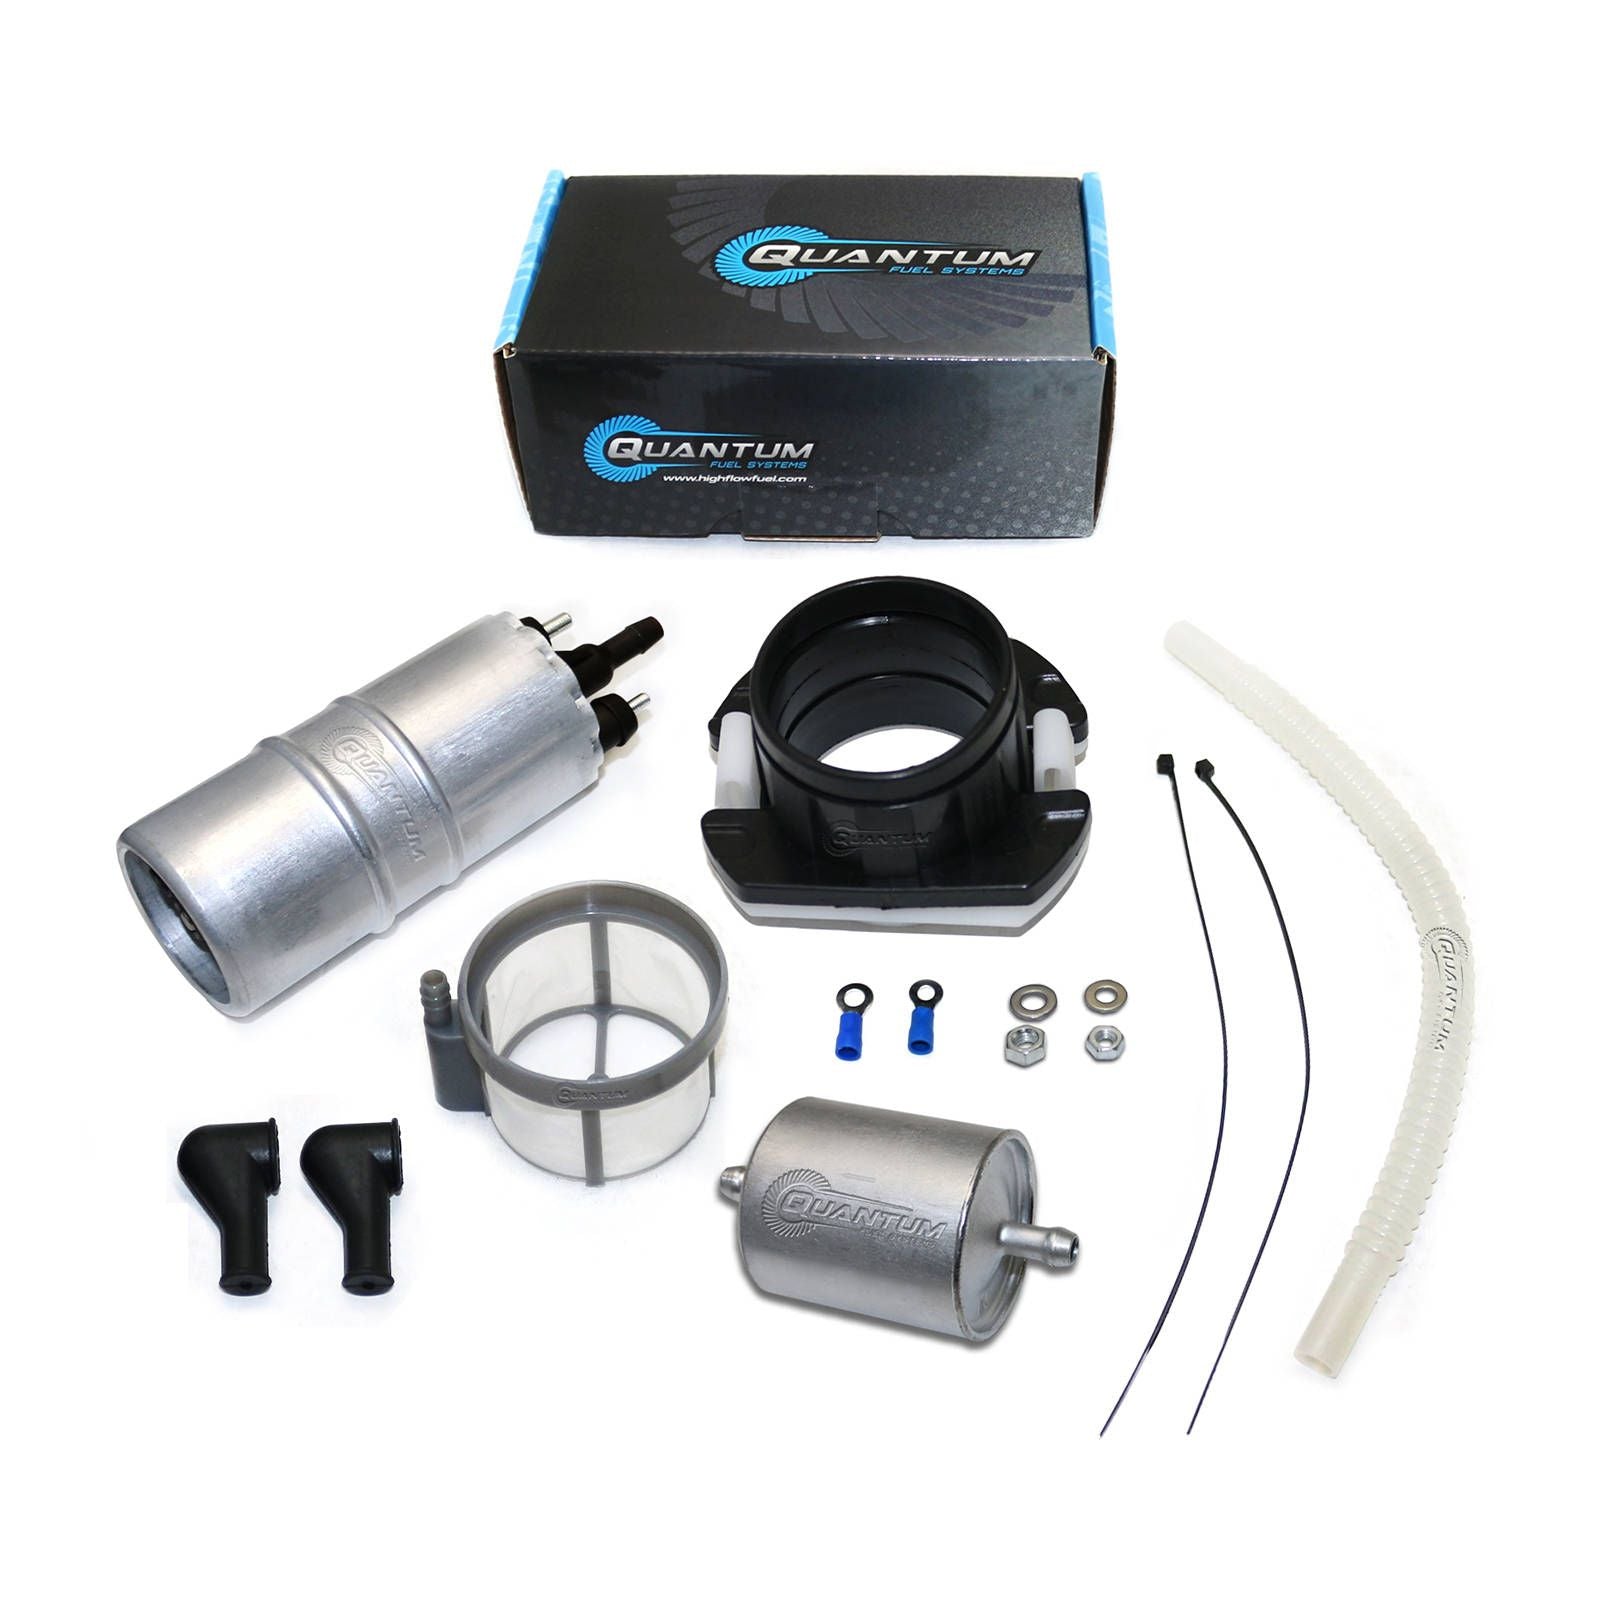 New QUANTUM In-Tank EFI Fuel Pump With Filter #QFHFP437F